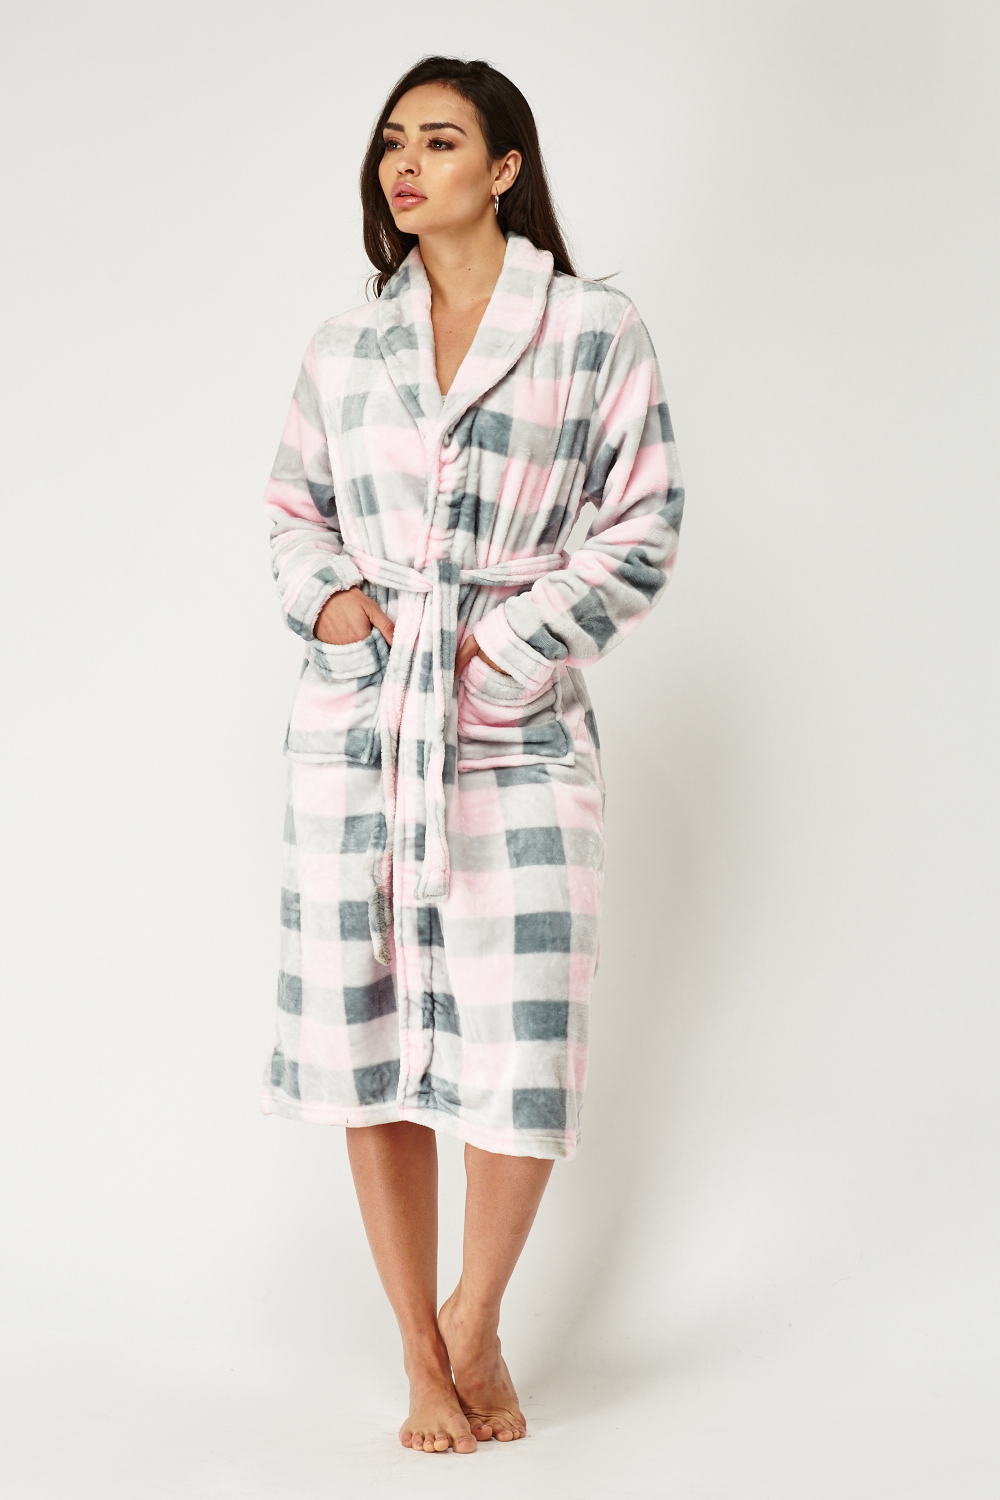 next dressing gowns for ladies